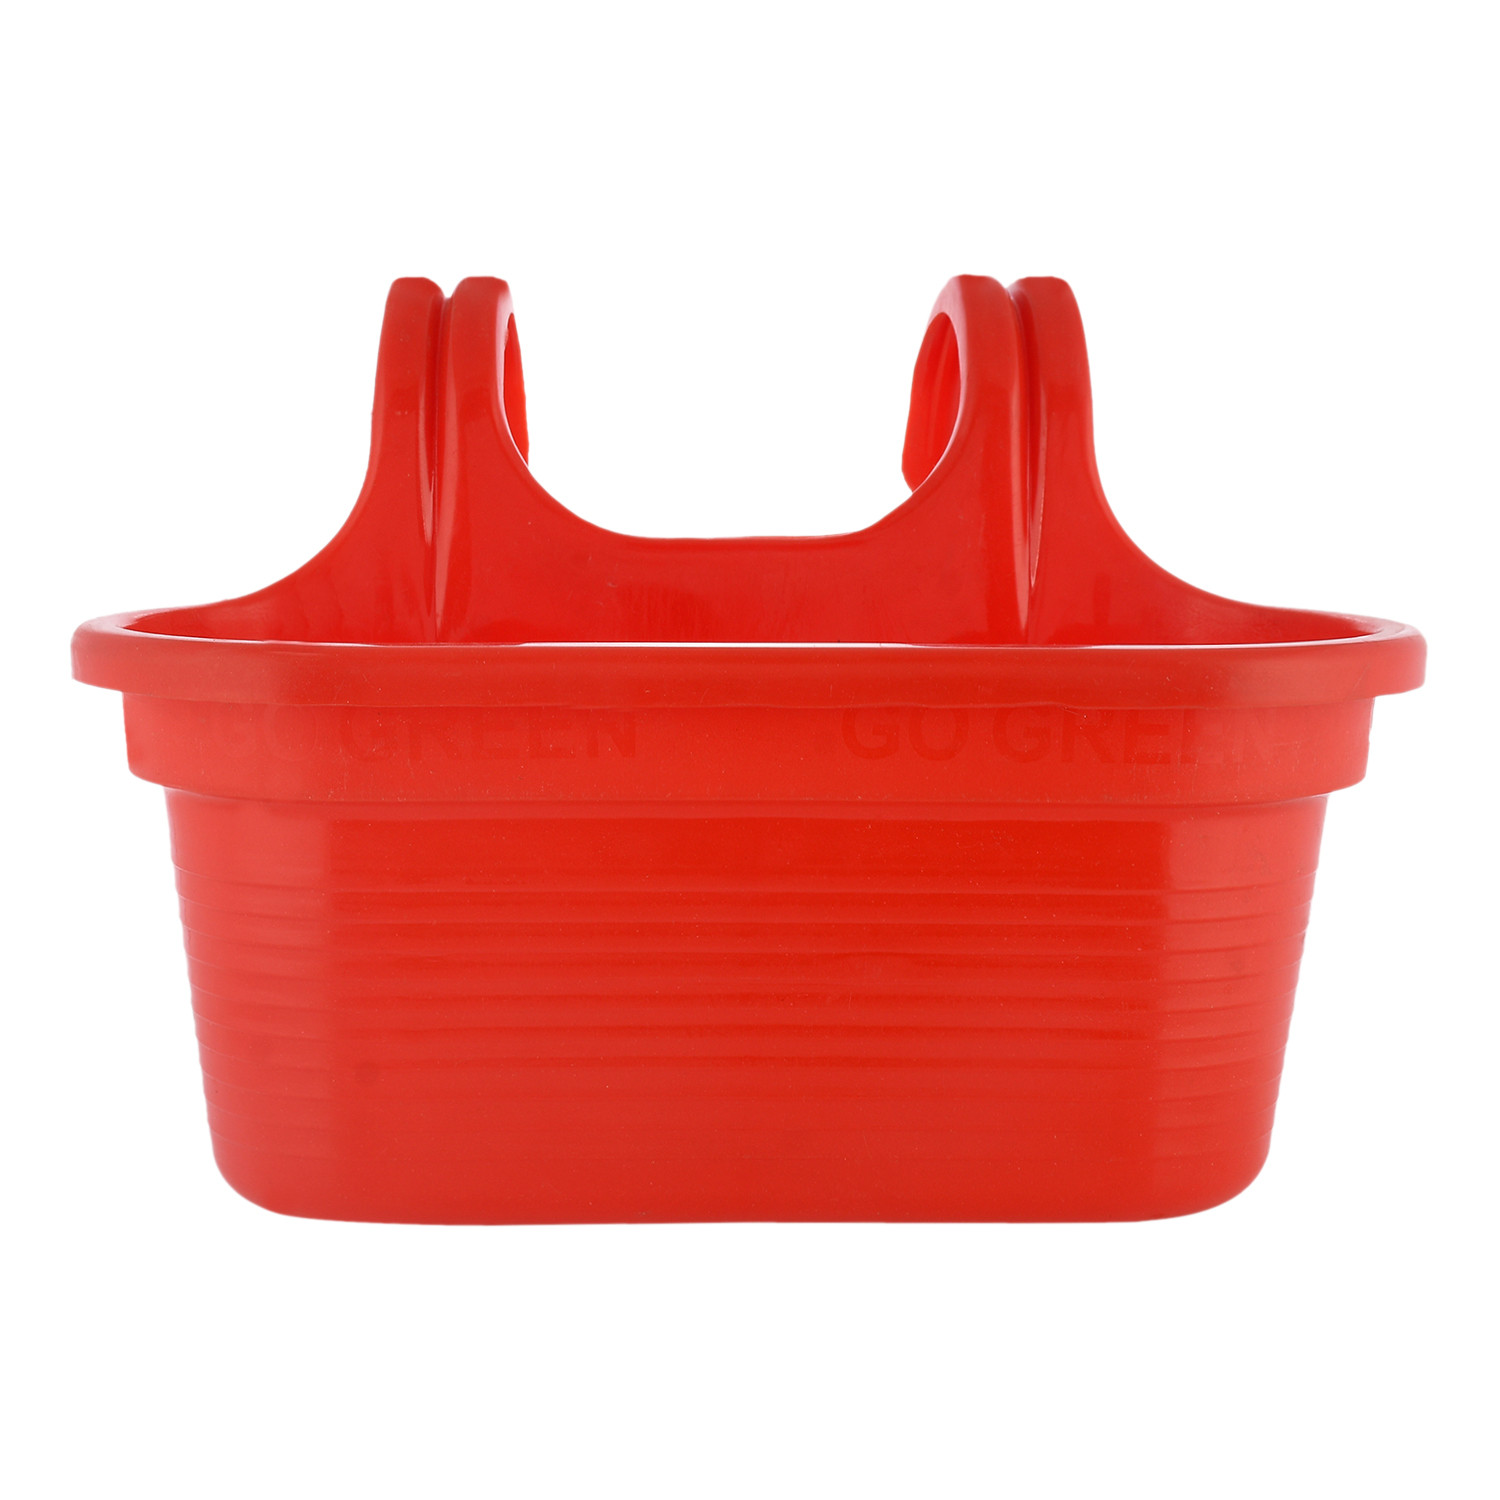 Kuber Industries Hanging Flower Pot|Double Hook Plant Container|Durable Plastic Glossy Finish Pots for Home|Balcony|Garden|12 Inch (Red)